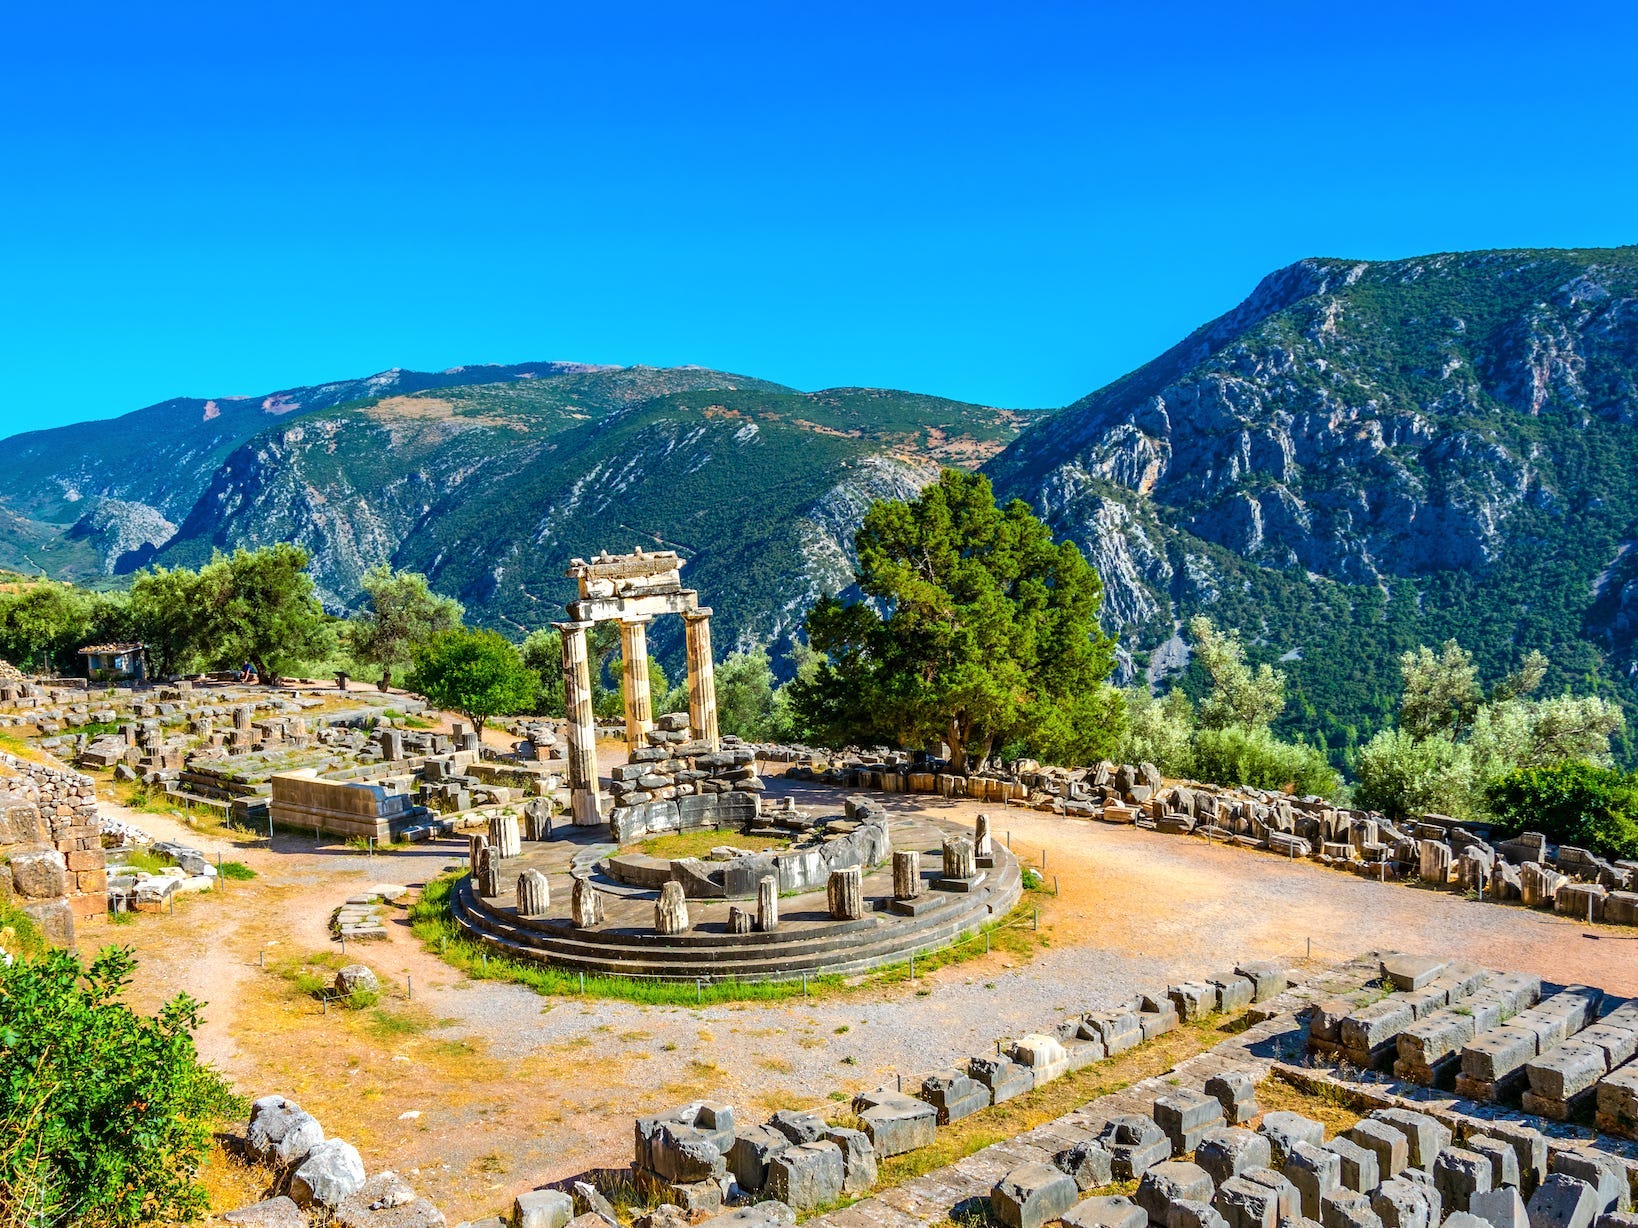 <p>Ancient Greeks believed that Delphi was the "navel of the world." The myth goes that Zeus released one eagle from the east and one from the west and the birds met in the middle at Delphi, where the famous oracle was built. </p><p>In addition to being an incredible archaeological site, Delphi also has a stunning natural backdrop. My mother said she still remembers the sweeping views of the valleys and the lovely olive trees in addition to the incredible ancient ruins. </p><p>"I loved visiting Delphi because of its history, but also because of the beautiful natural surroundings," she added. </p>